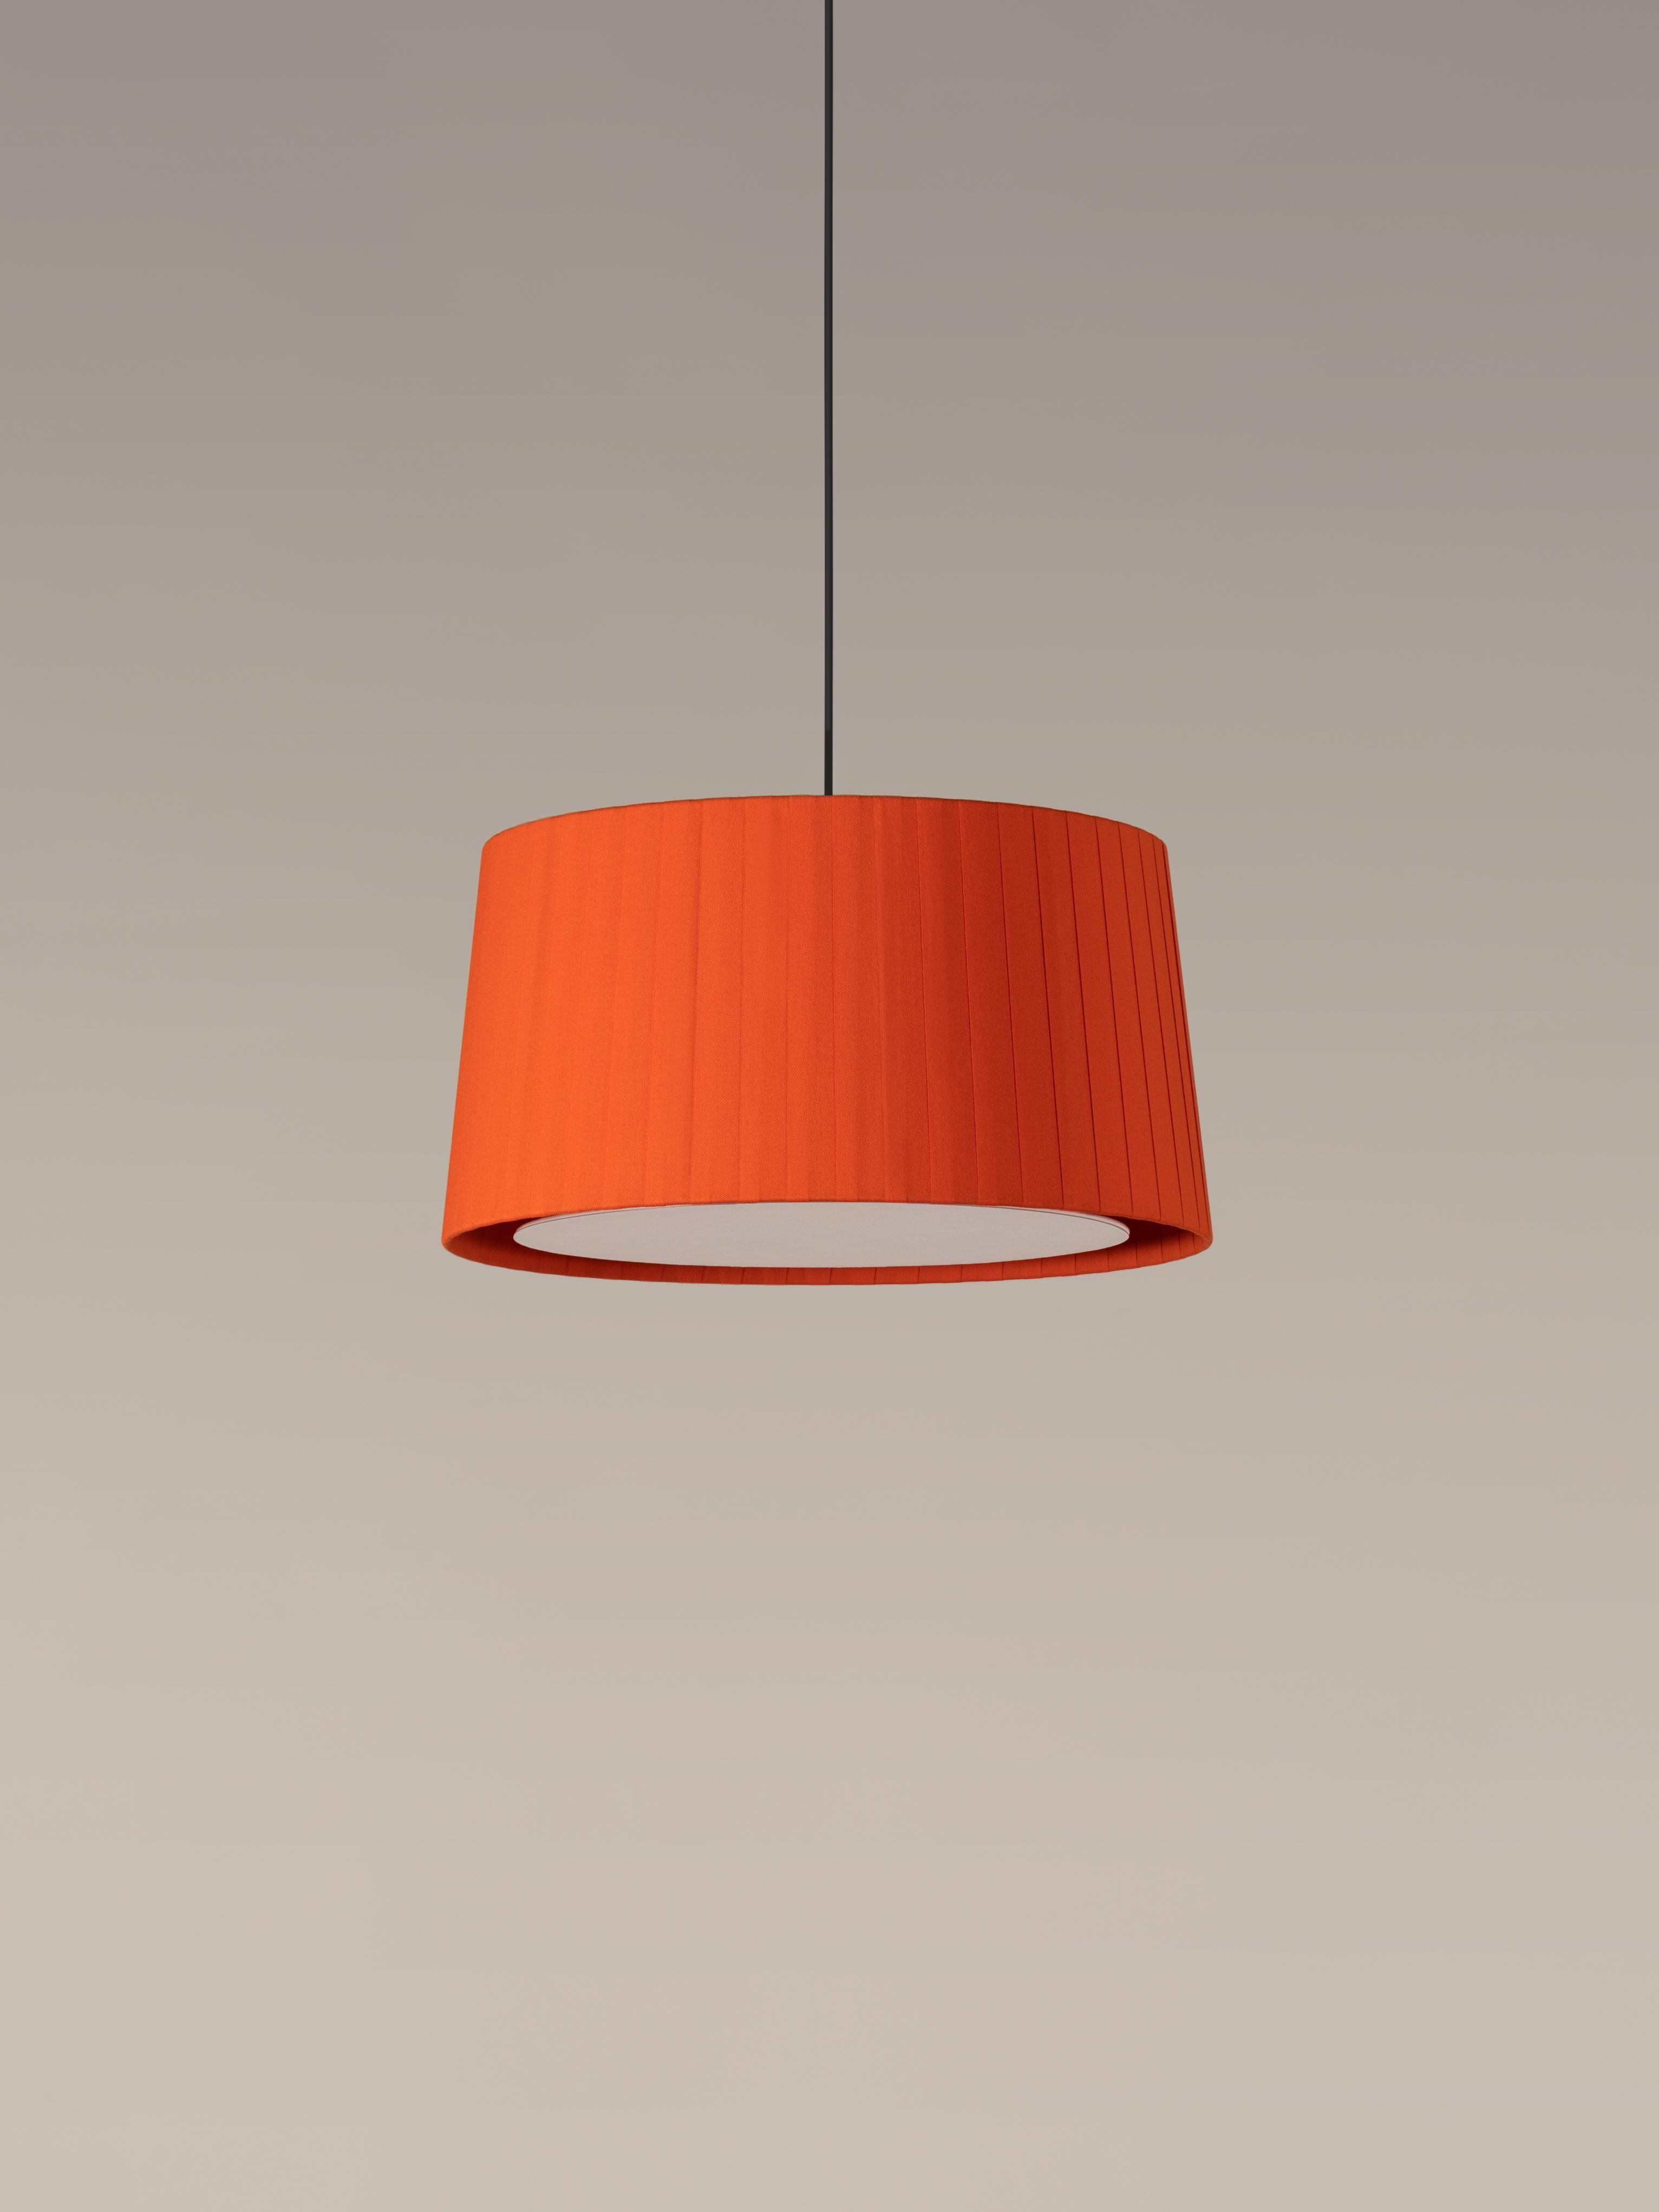 Red GT6 pendant lamp by Santa & Cole
Dimensions: D 45 x H 23 cm
Materials: Metal, ribbon.
Available in other colors. Available in 2 lights version.

Designed for intermediate volumes and household areas, GT5 and GT6 are hanging lamps with